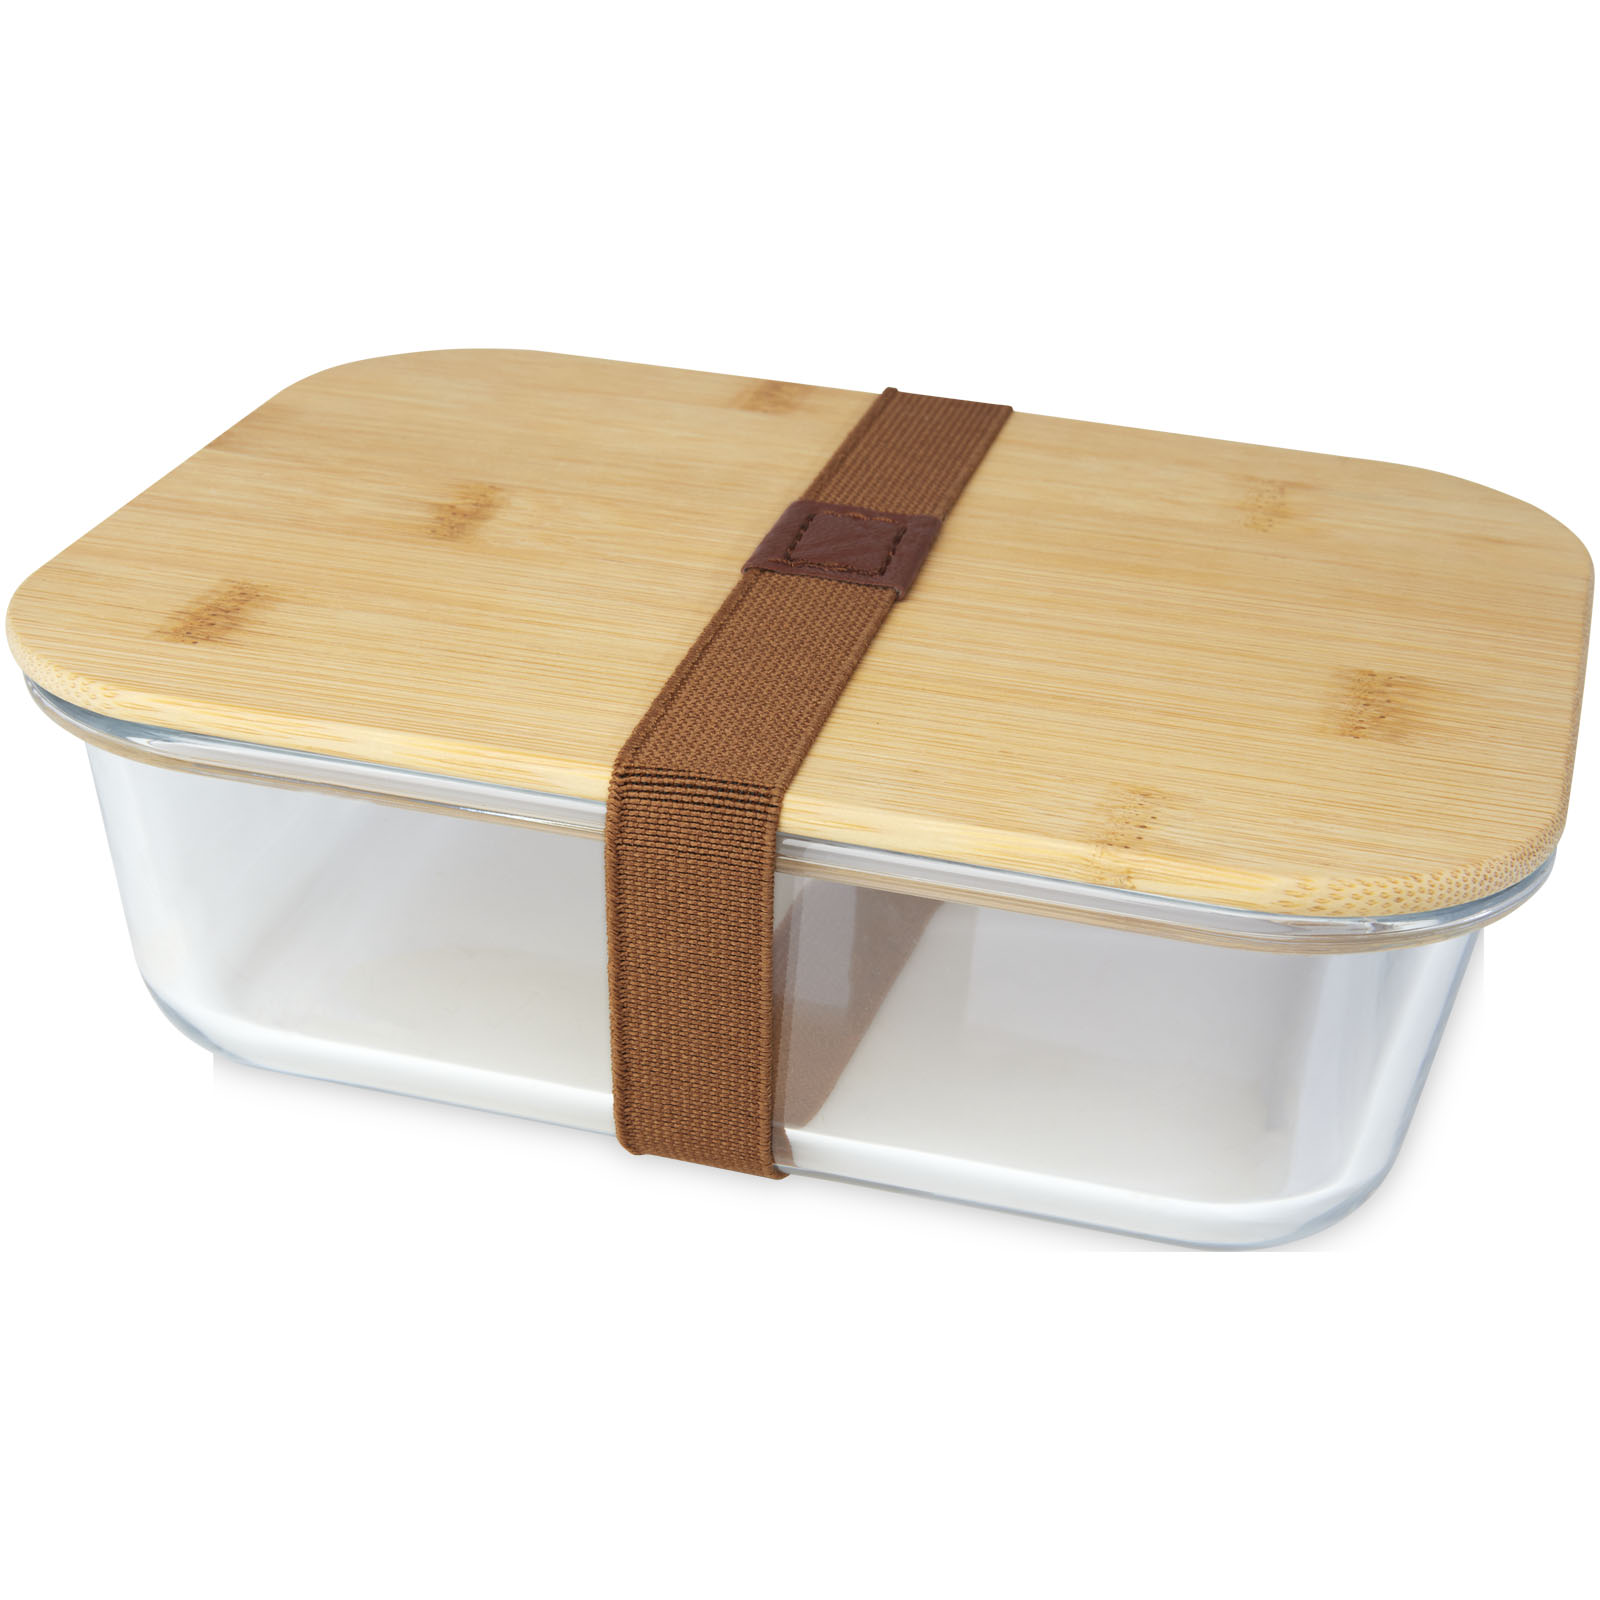 Home & Kitchen - Roby glass lunch box with bamboo lid